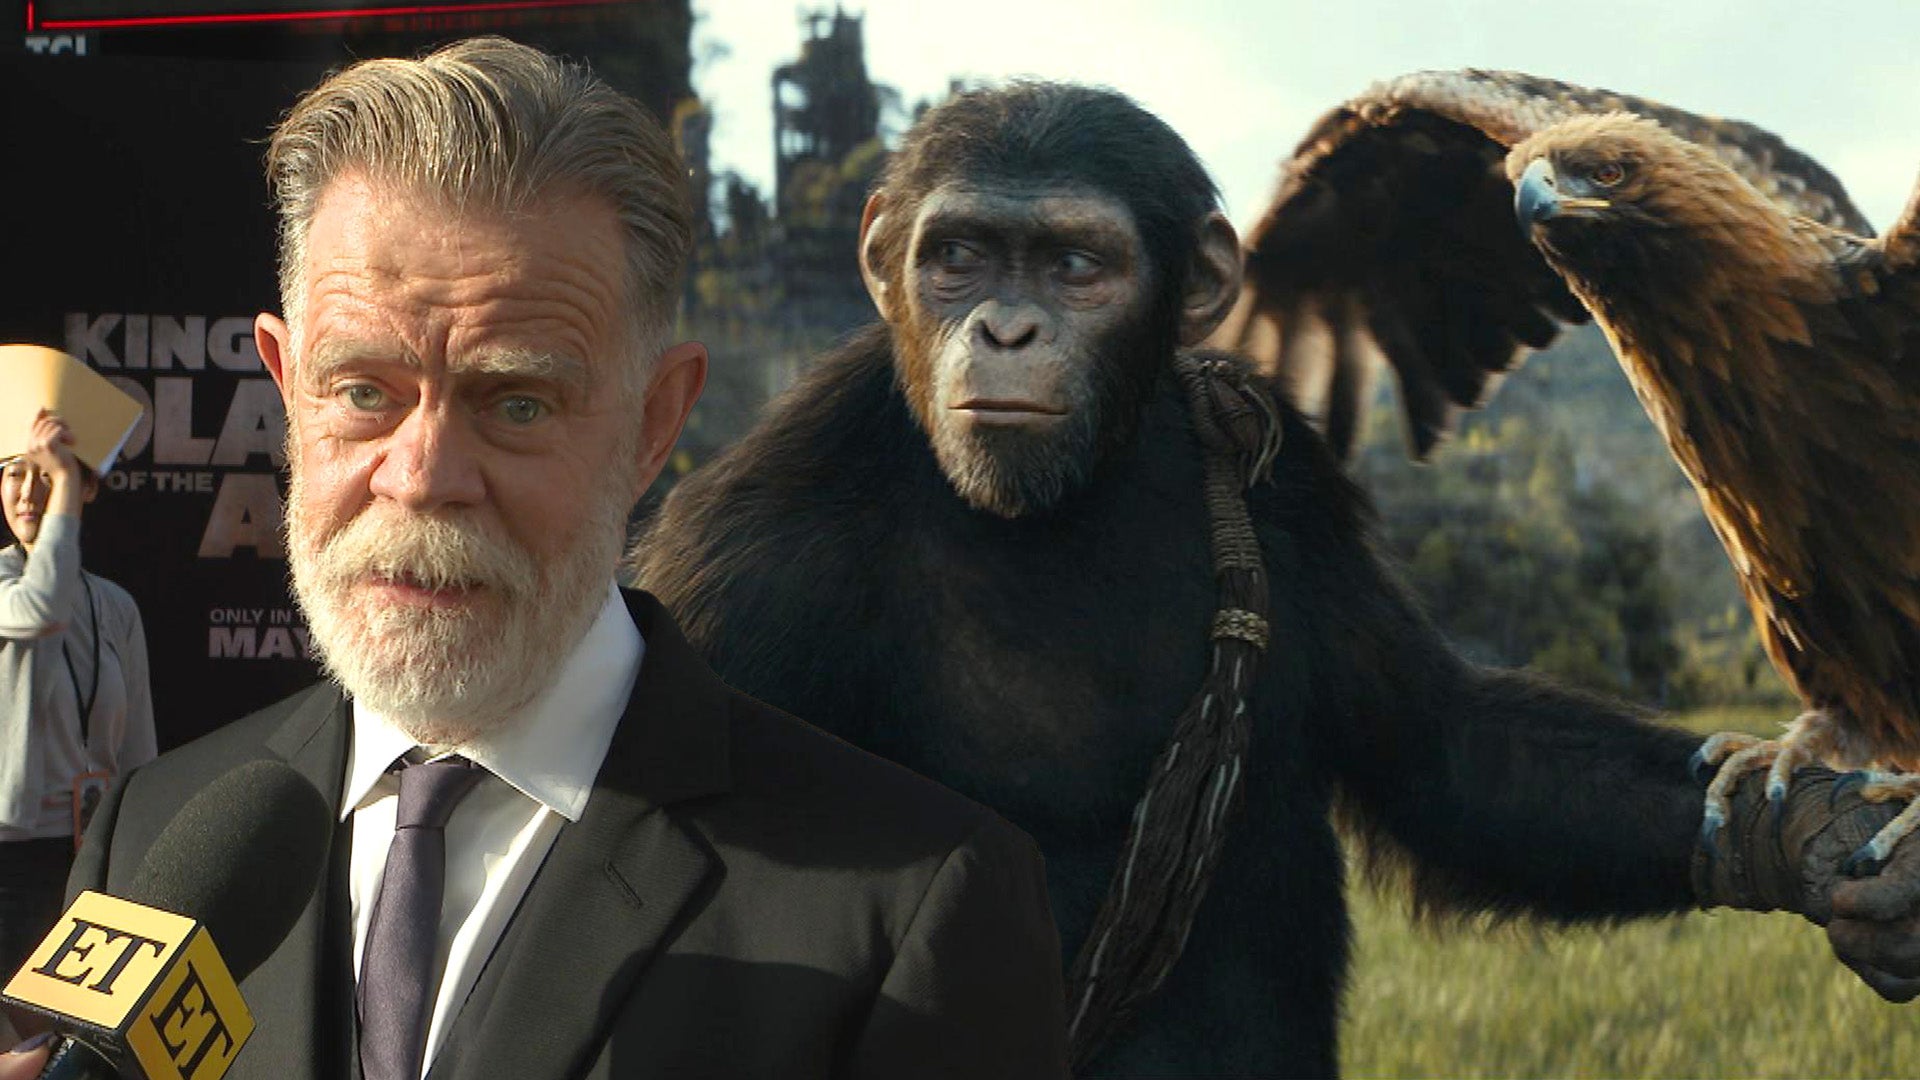 'The Kingdom of the Planet of the Apes': William H Macy Calls Joining Franchise 'Gratifying'